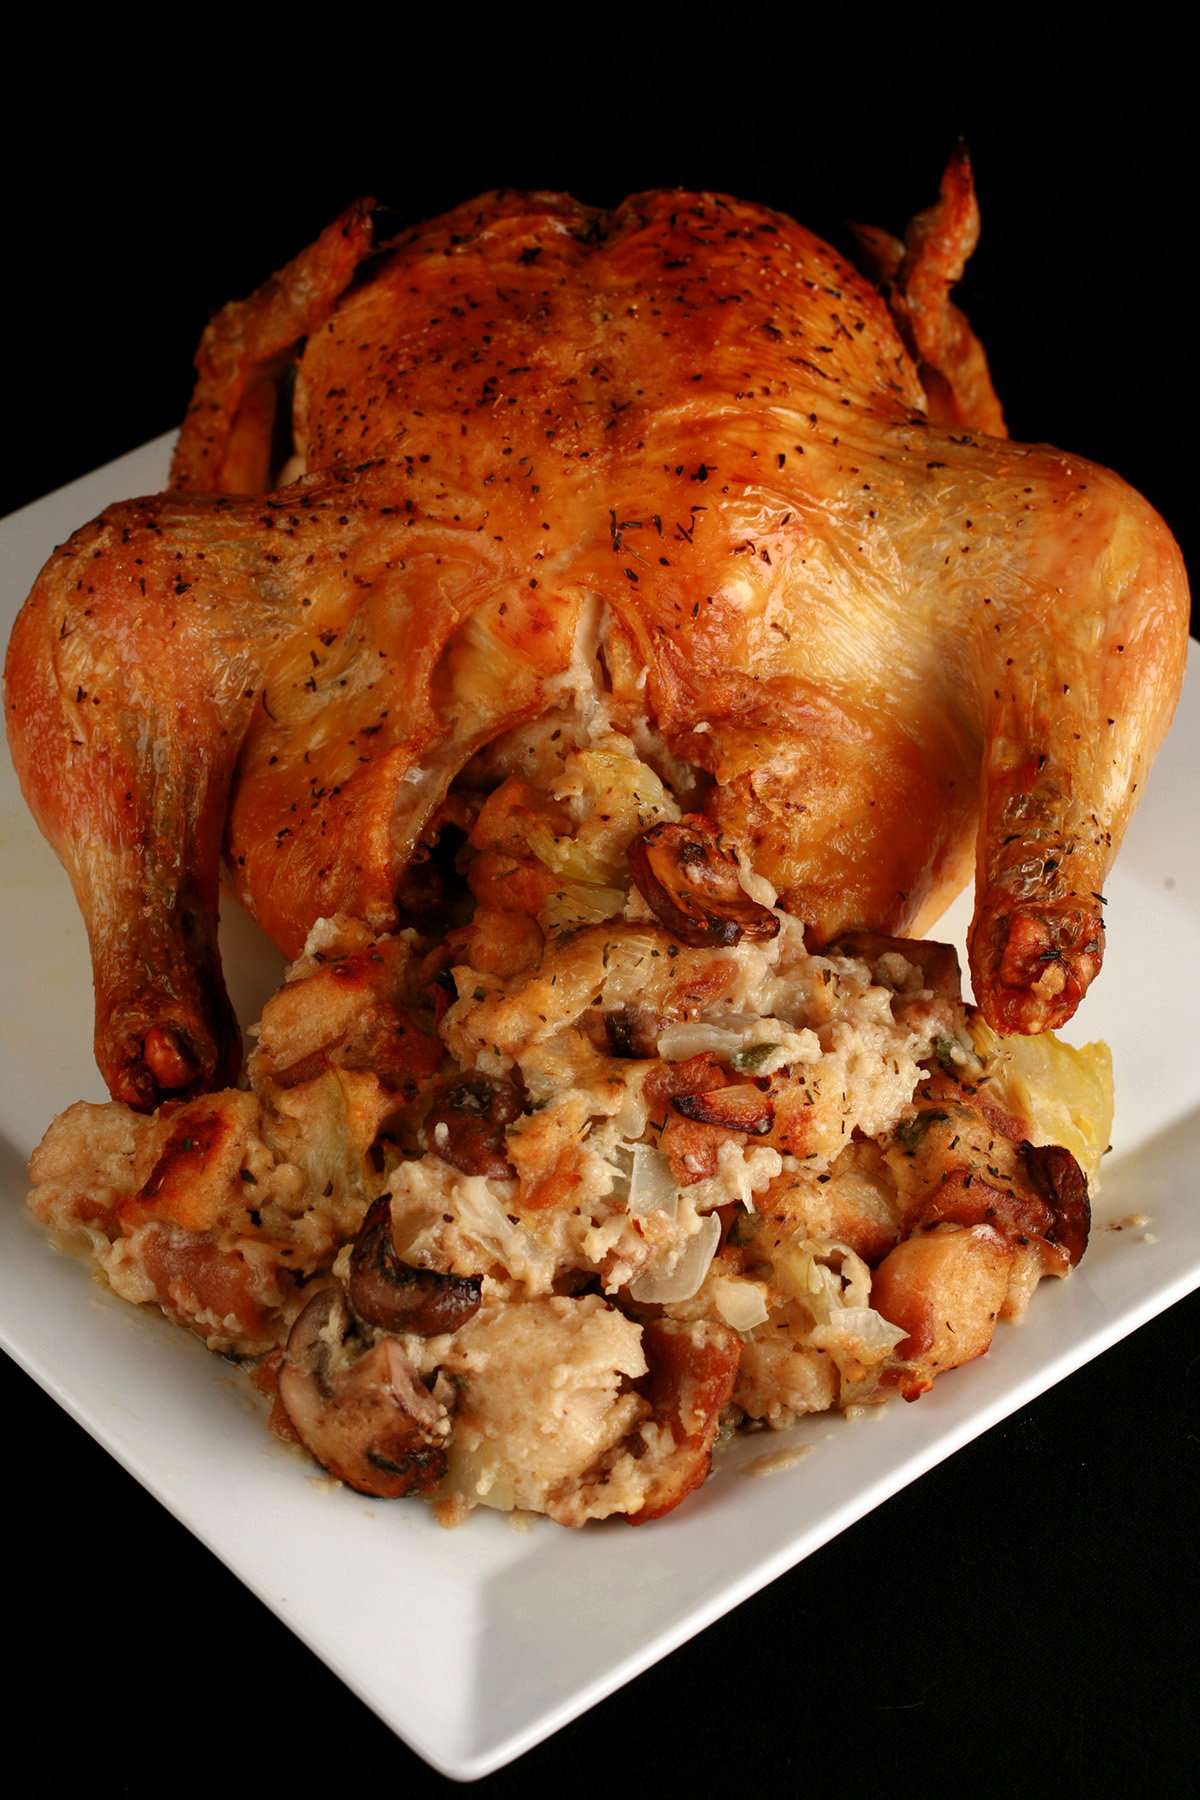 A small roasted turkey on a platter, with gluten-free stuffing spilling out from it.